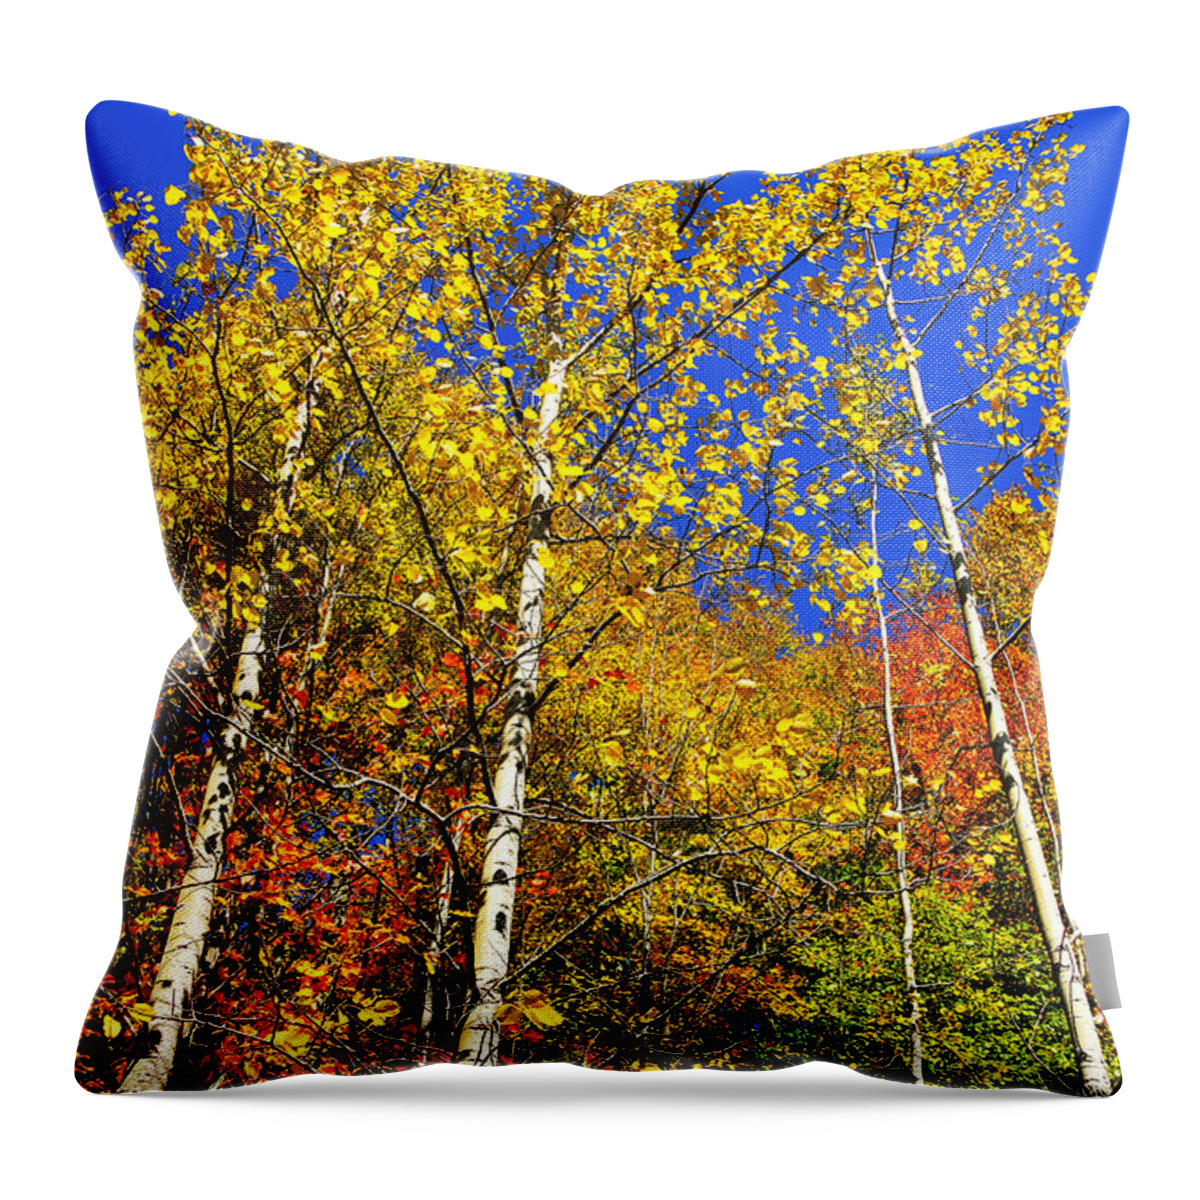 Summit Lake Throw Pillow featuring the photograph Yellow Leaves Blue Sky by Thomas R Fletcher